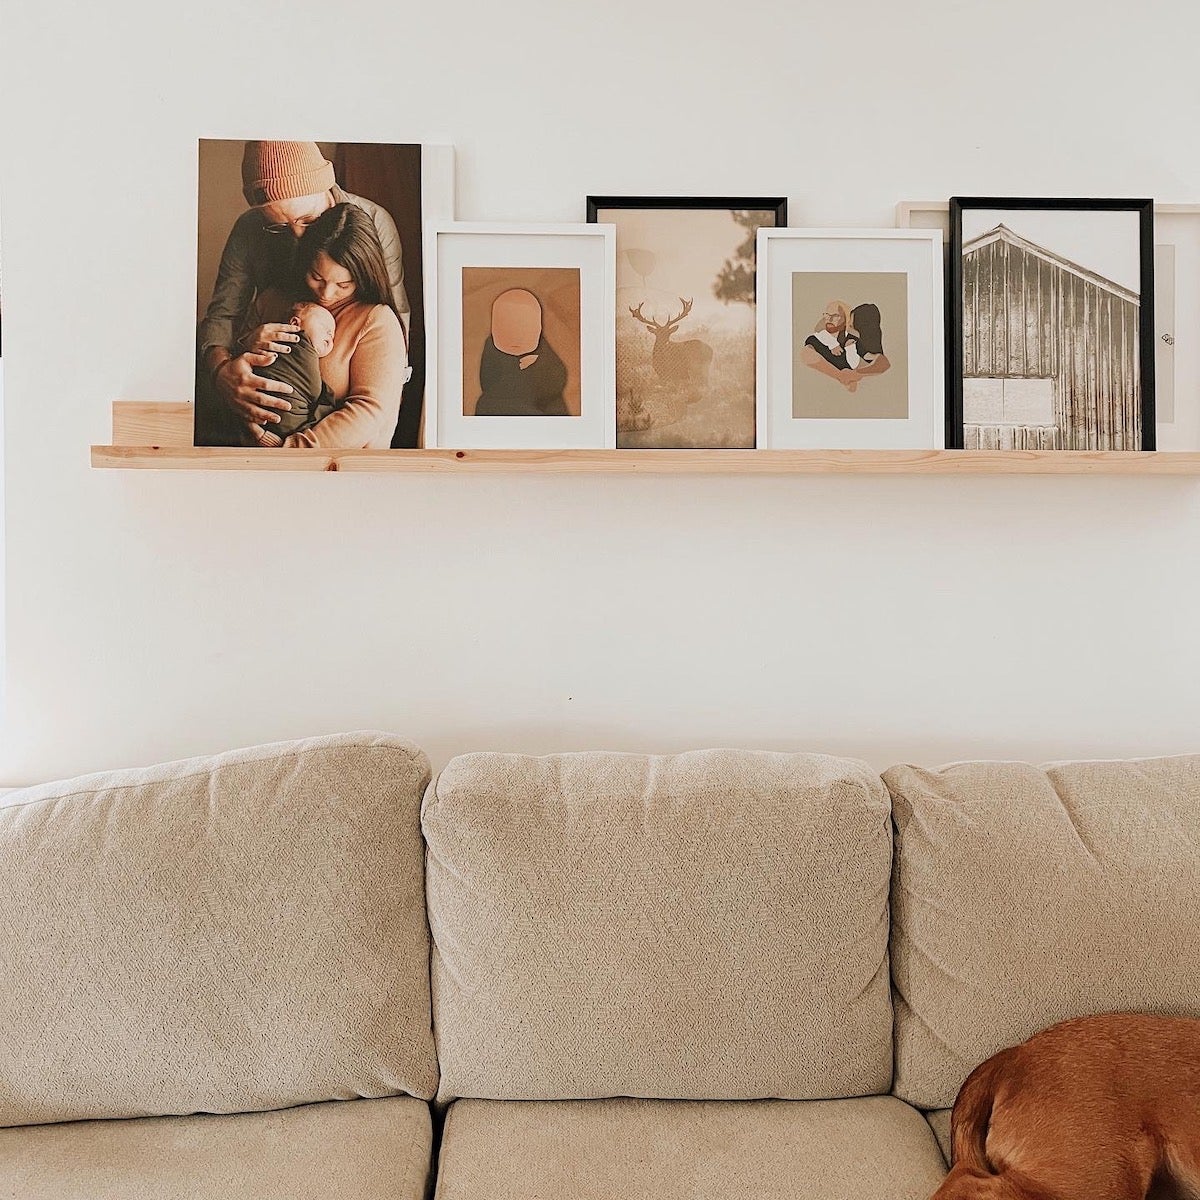 Photos and frames displayed above a couch along a wooden ledge.